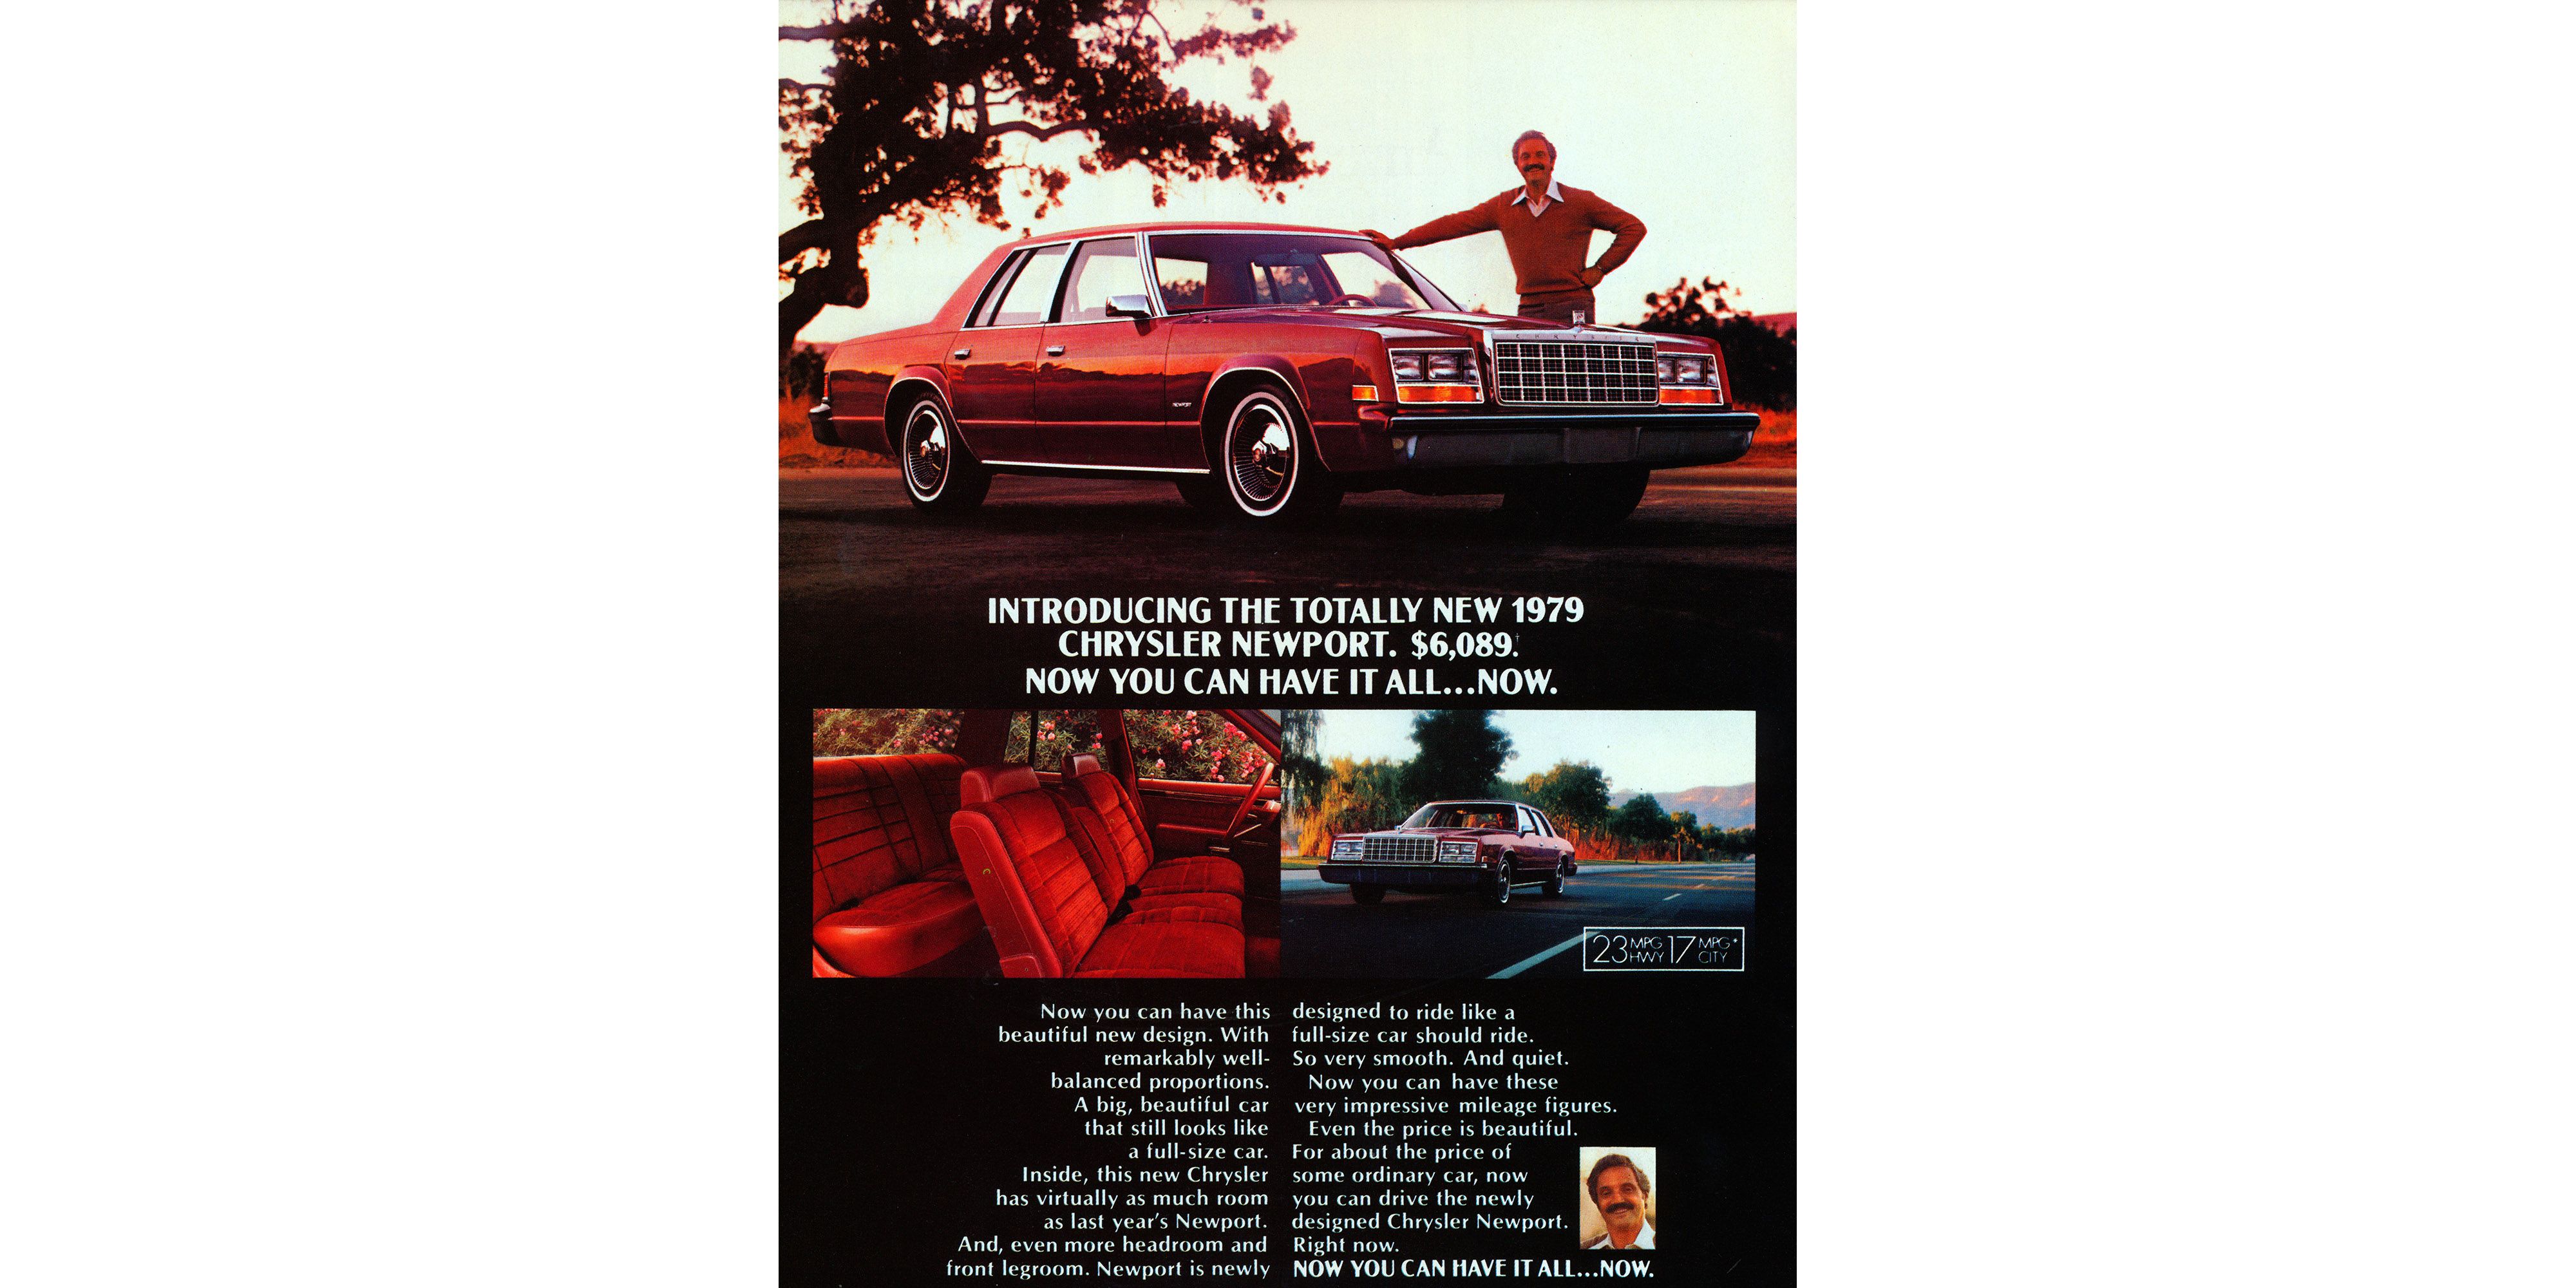 Now You Can Have the New Downsized 1979 Chrysler Newport... Now